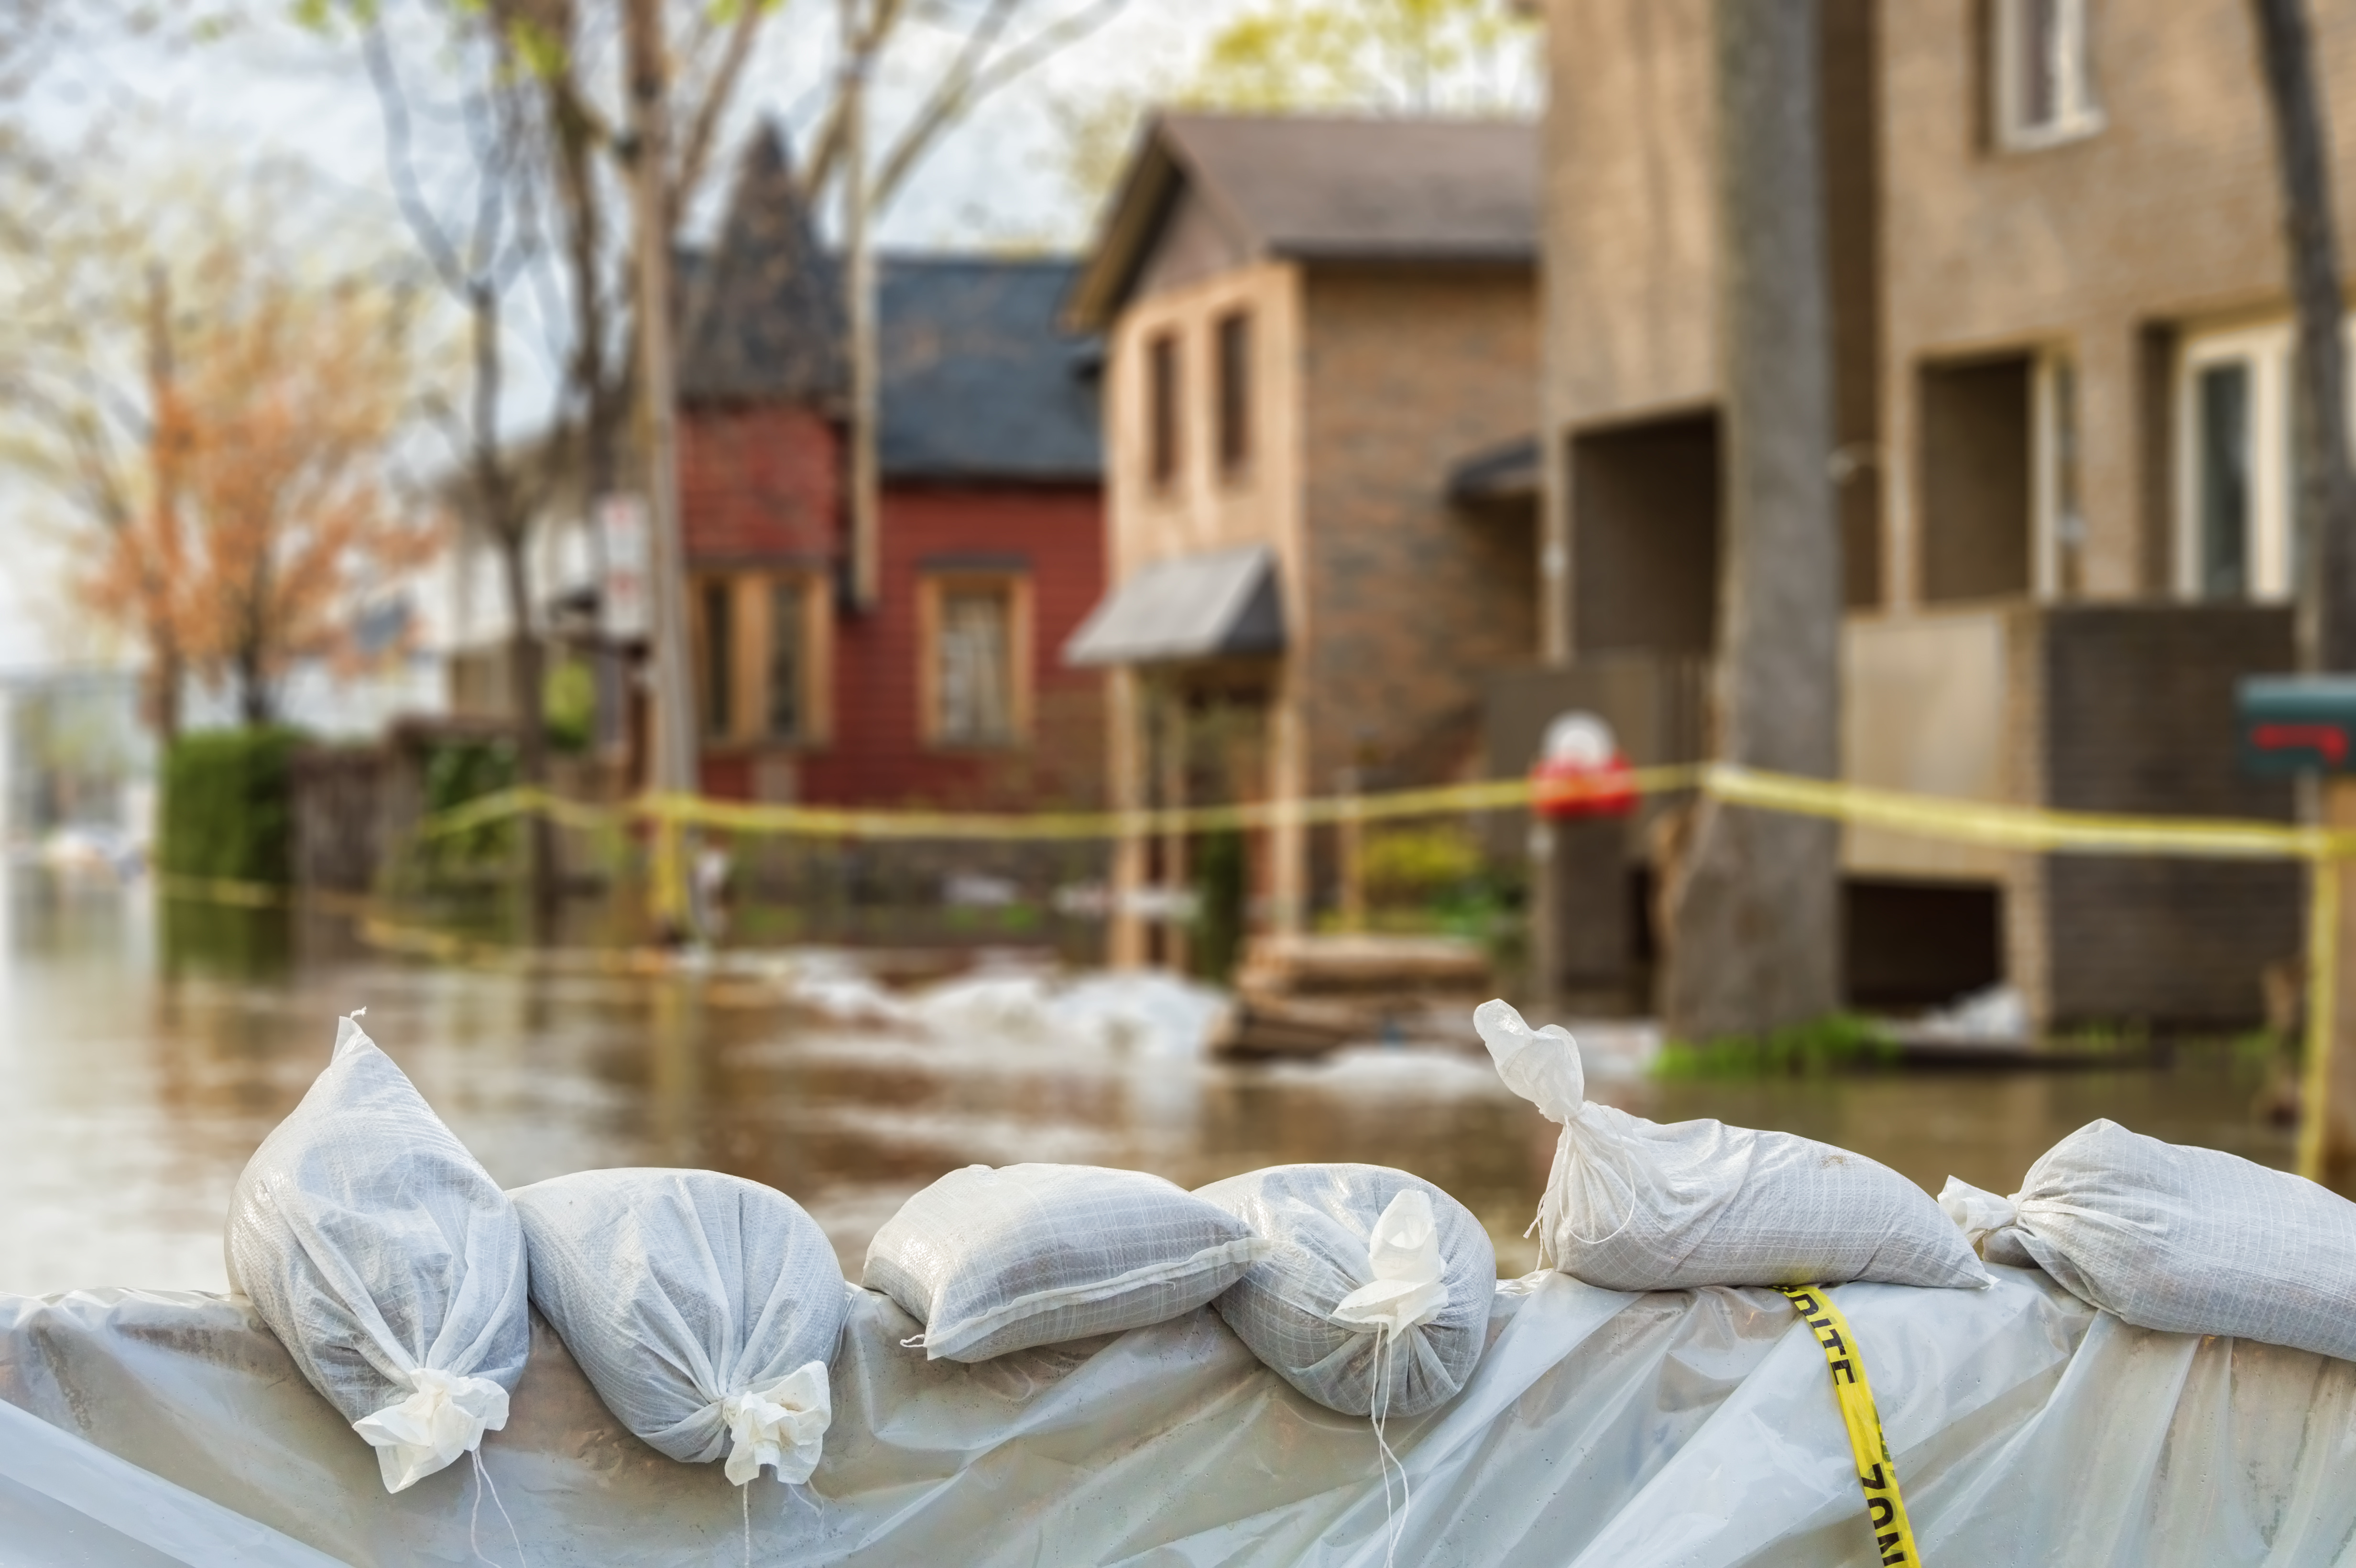 What You Need to Know About the New FEMA Flood Insurance Rating System